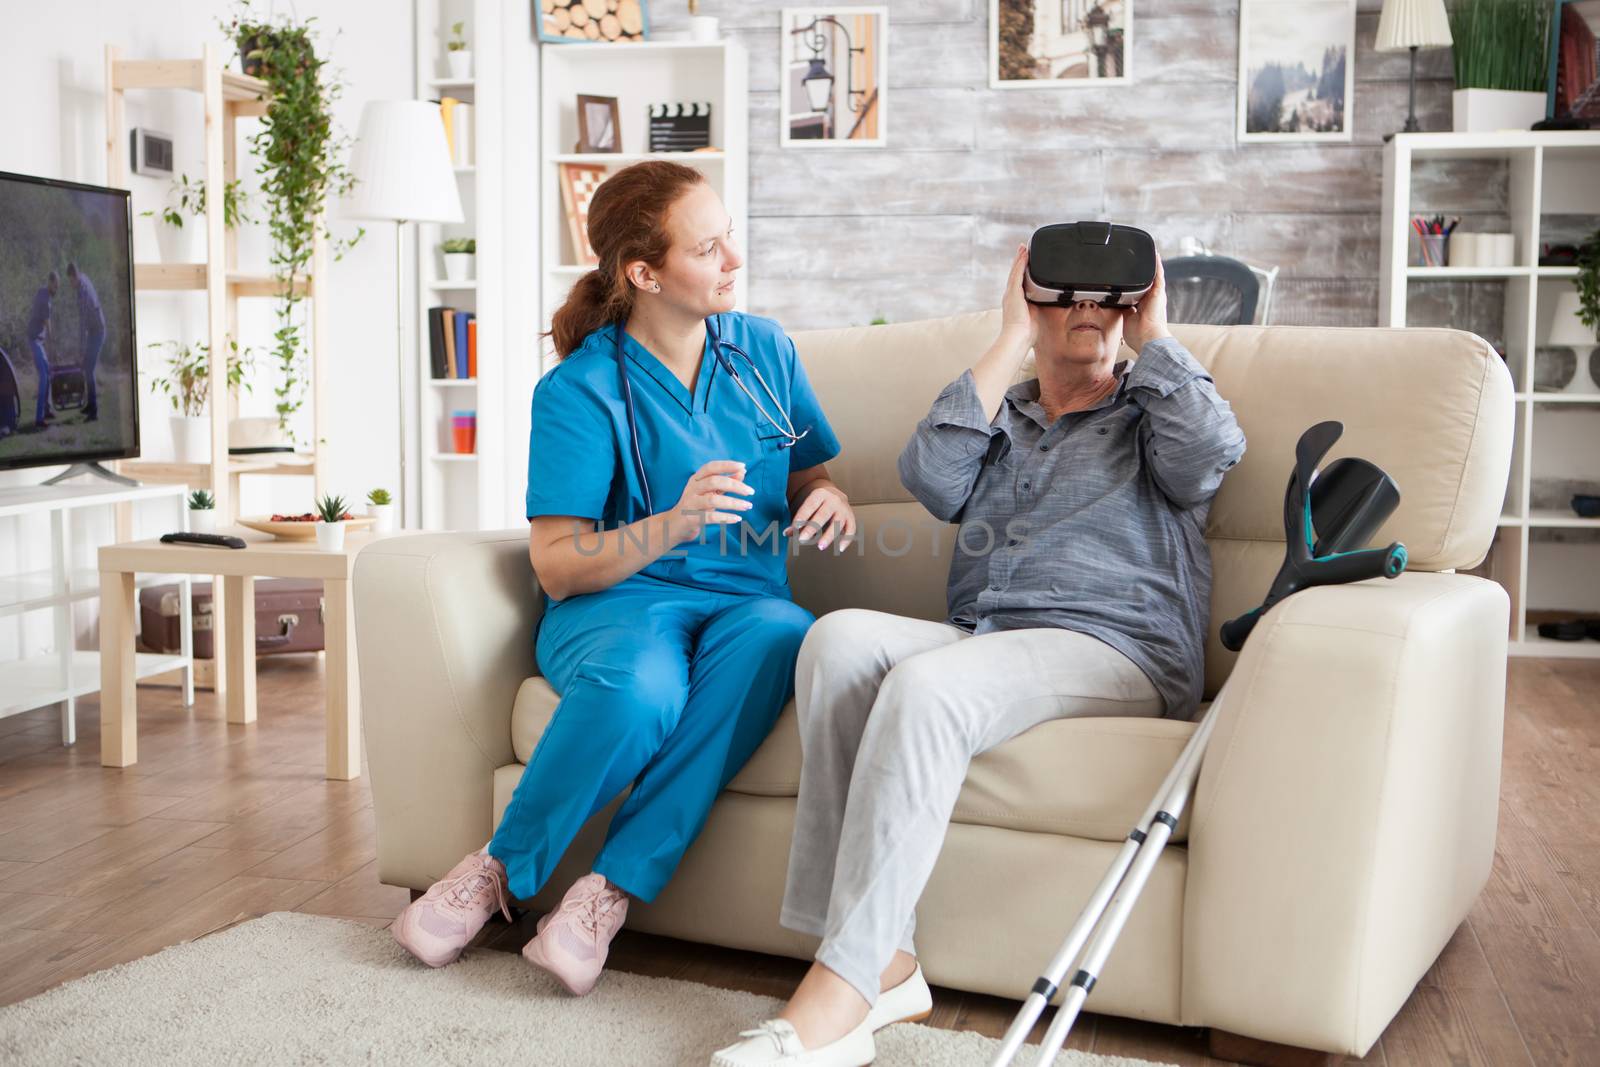 Female doctor looking at old woman in nursing home experiencing virtual reality with vr headset.